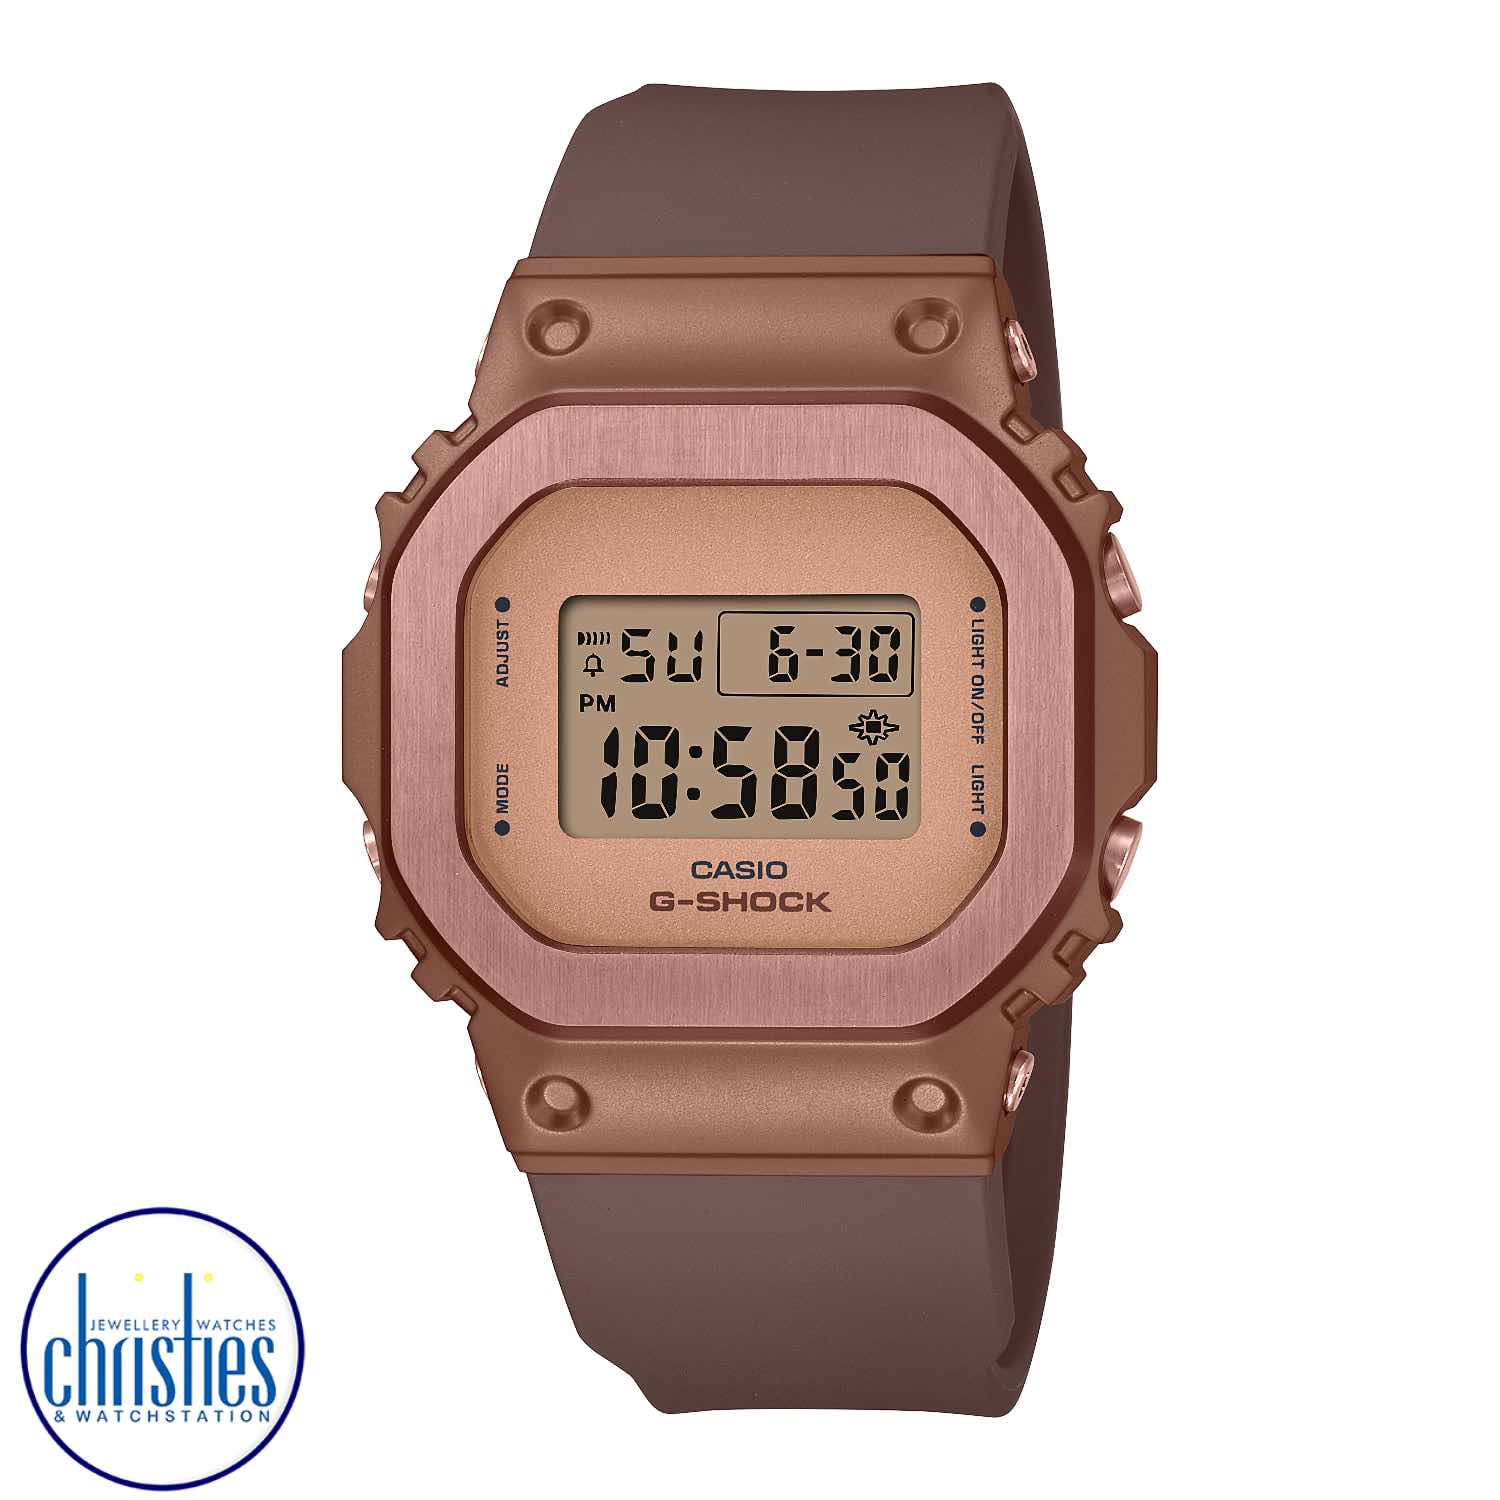 GMS5600BR-5 G-Shock Womens Monochromatic Bronze Watch. Bask in the glow of warm bronze — a metal-clad G-SHOCK with a smaller profile.